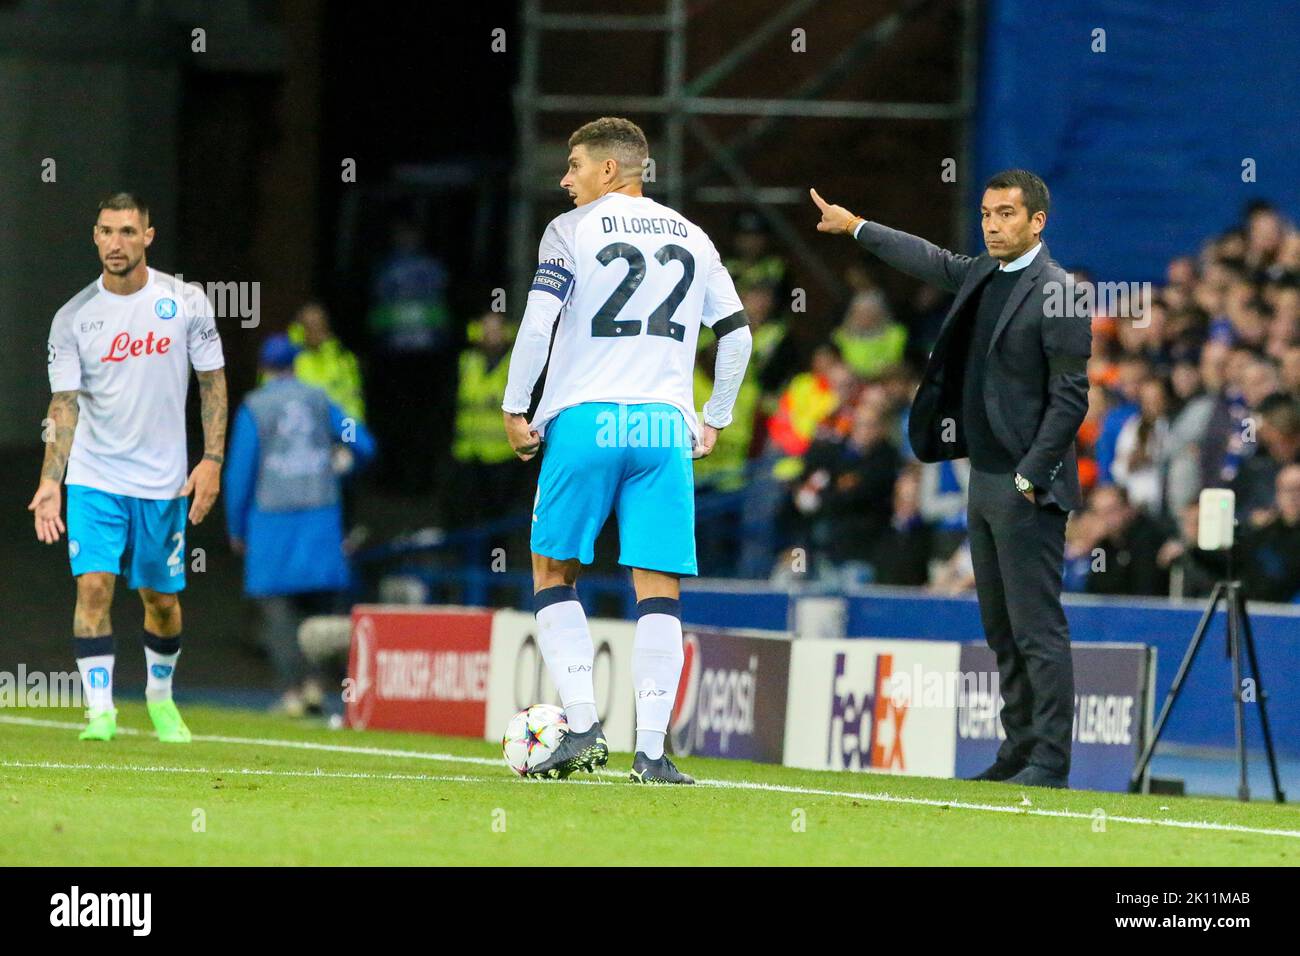 Glasgow, UK. 14th Sep, 2022. Rangers FC played FC Napoli at Rangers' Ibrox Stadium, Glasgow, Scotland, UK in the 'Champions League Group Stage'. The match referee was by Antonio Maten Lahoz from Spain. Credit: Findlay/Alamy Live News Stock Photo